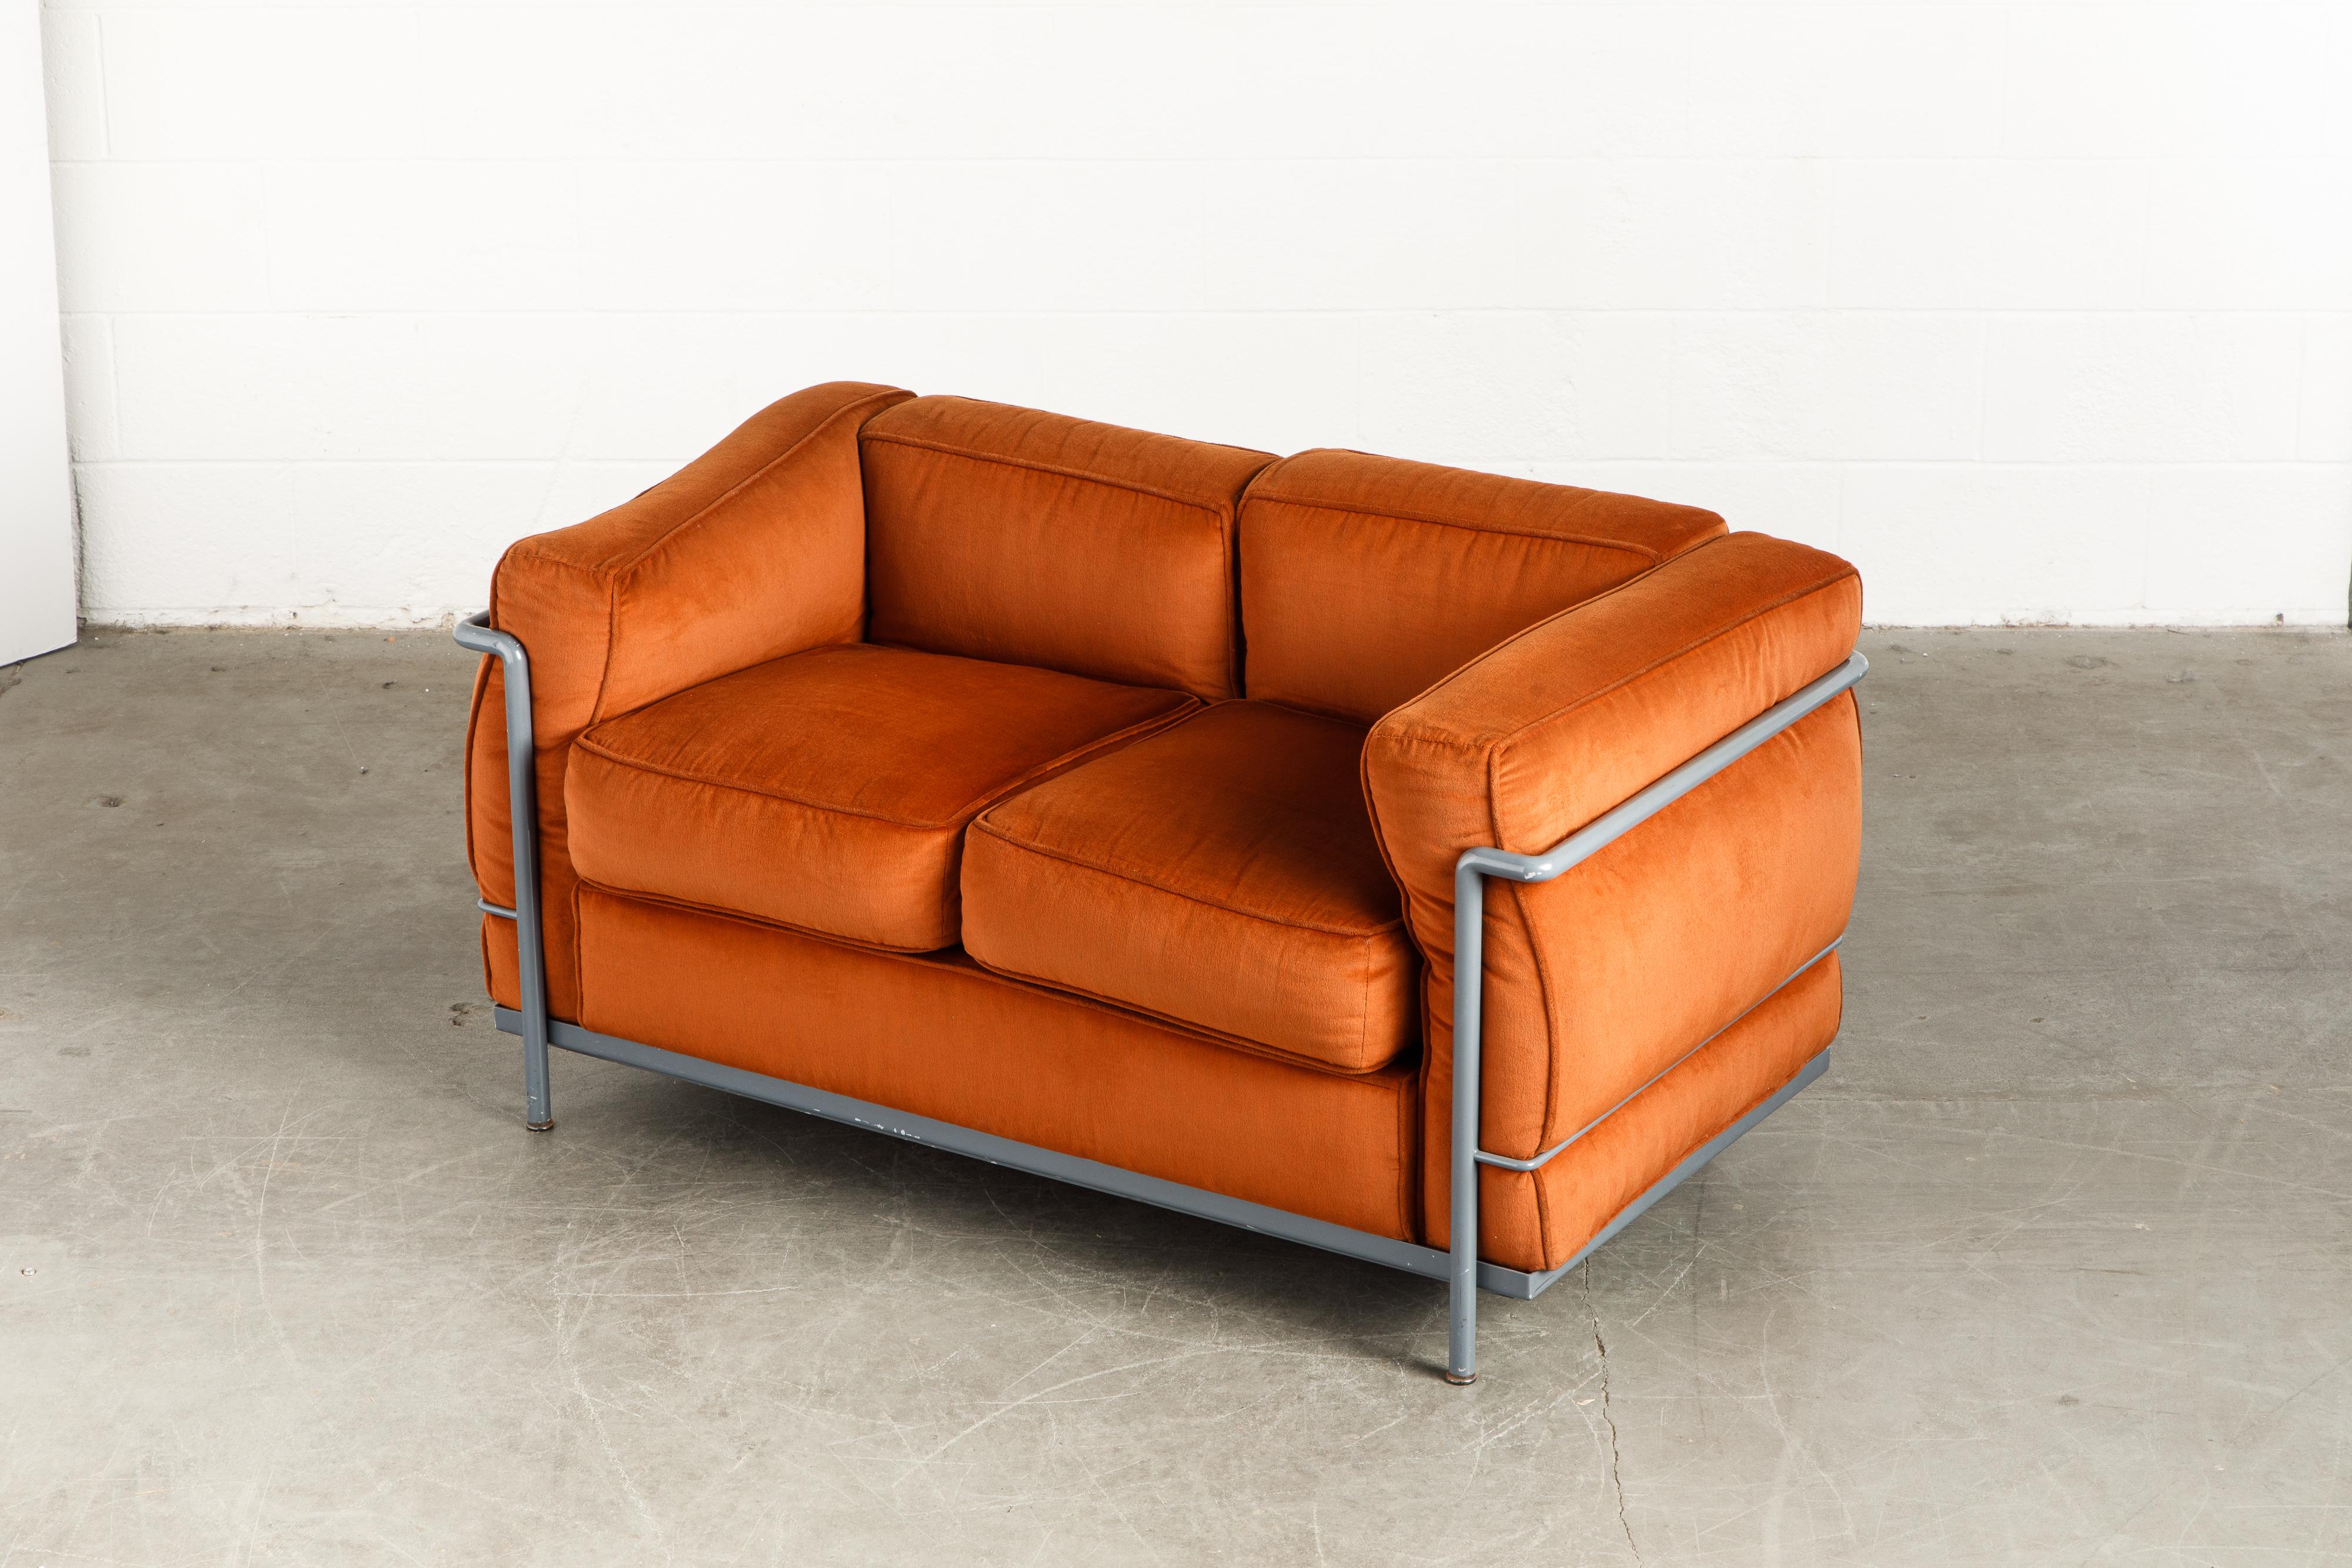 Steel Early Production LC2 Loveseat Sofa by Le Corbusier for Cassina, c. 1965, Signed